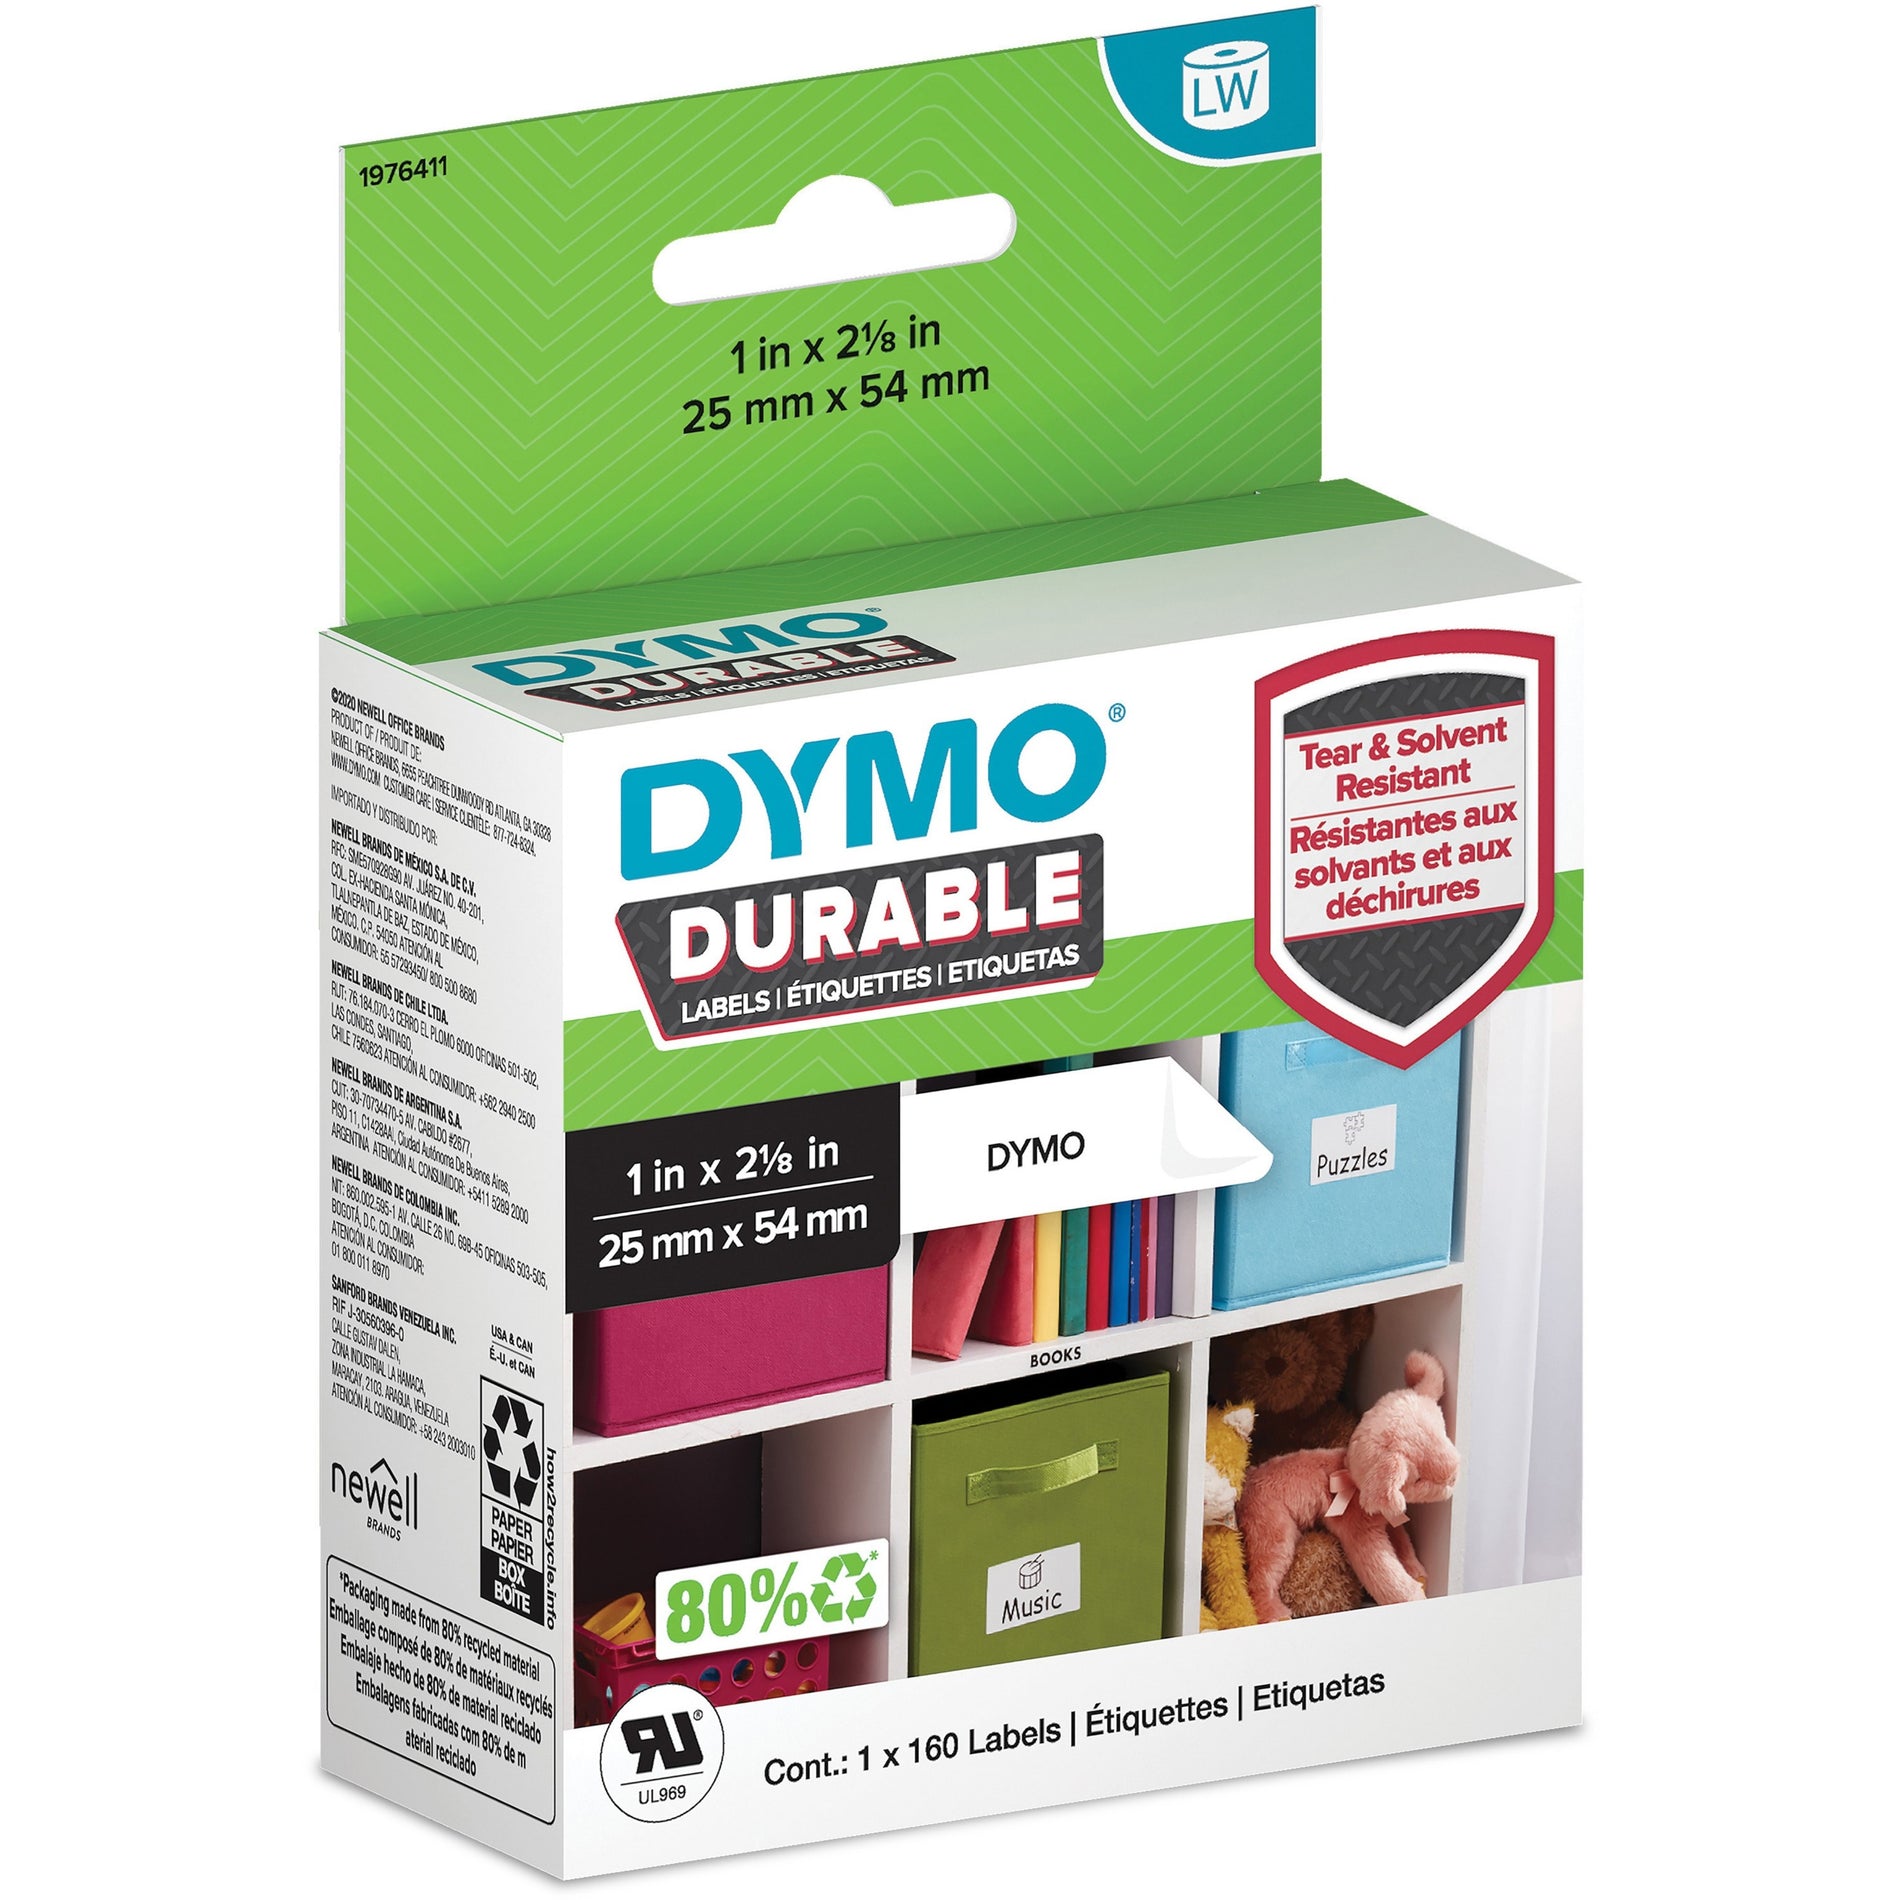 Dymo 1976411 LabelWriter Labels, 1"x2-1/8", 160/RL, White, Heat Resistant, Adhesive, Durable